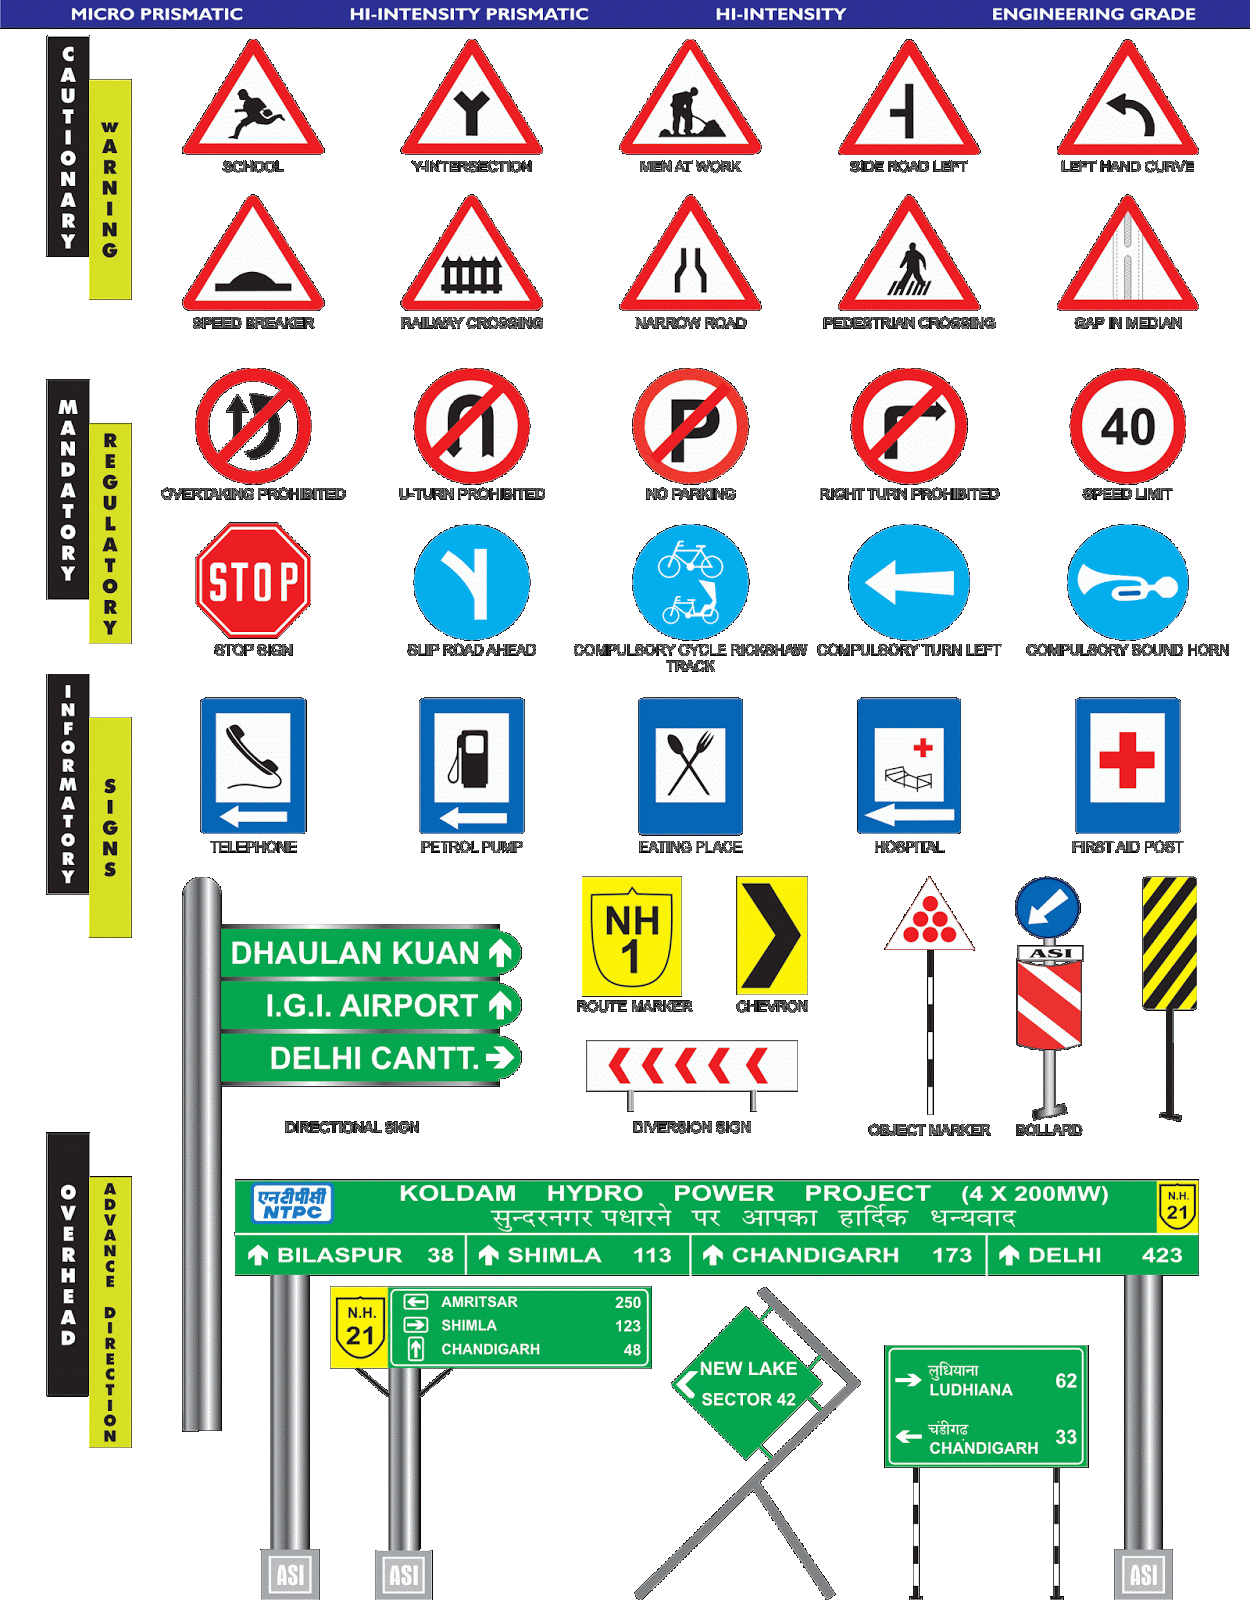 Road Signs Chart India